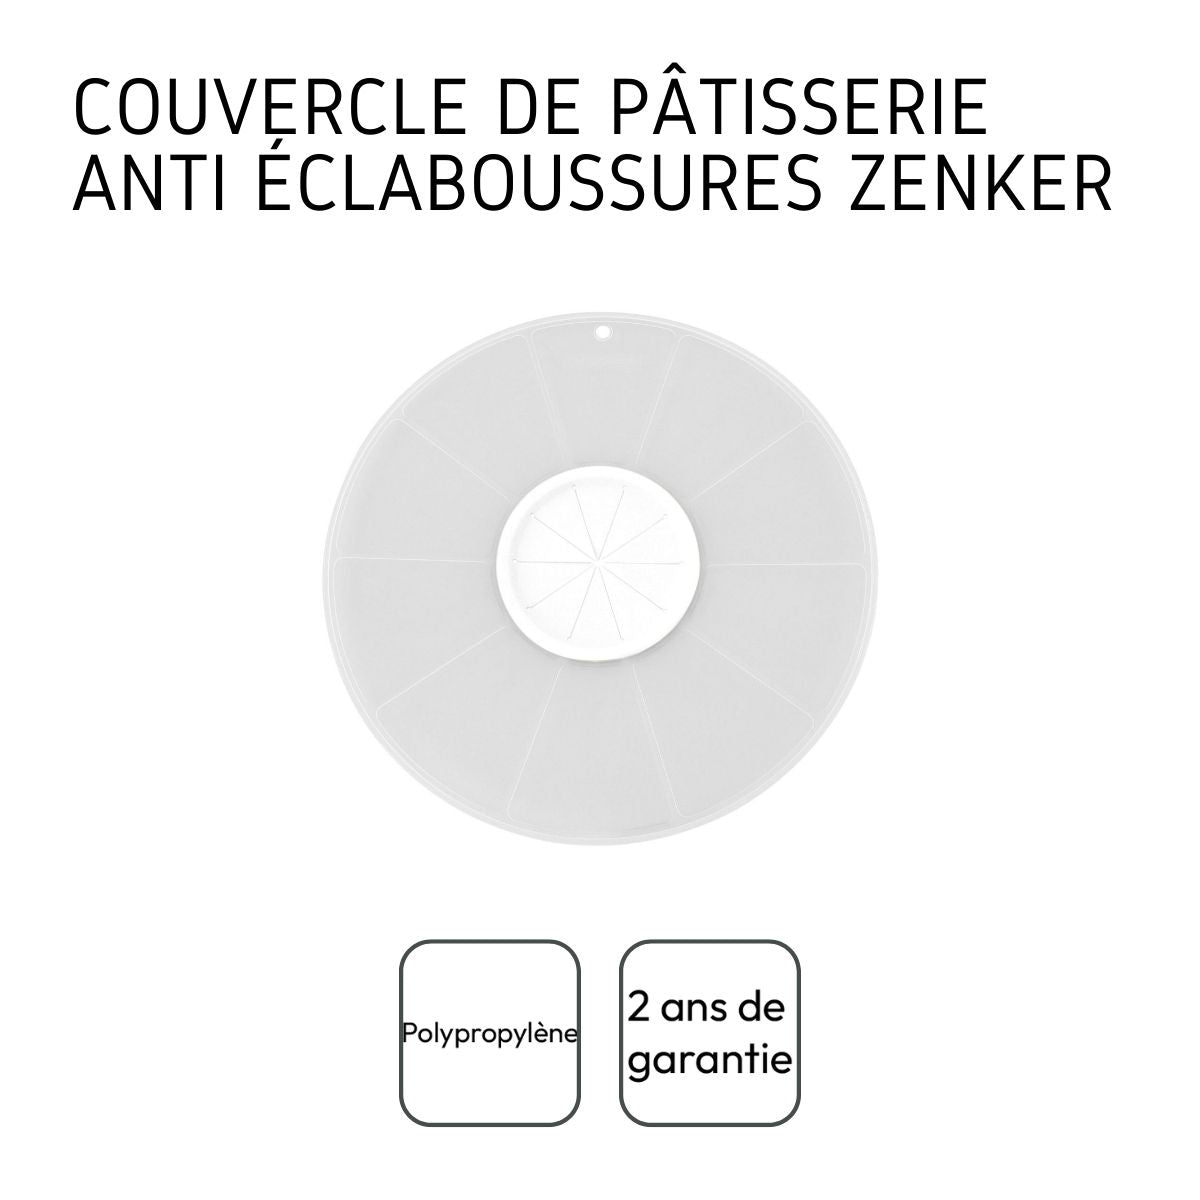 Couvercle anti projections Zenker